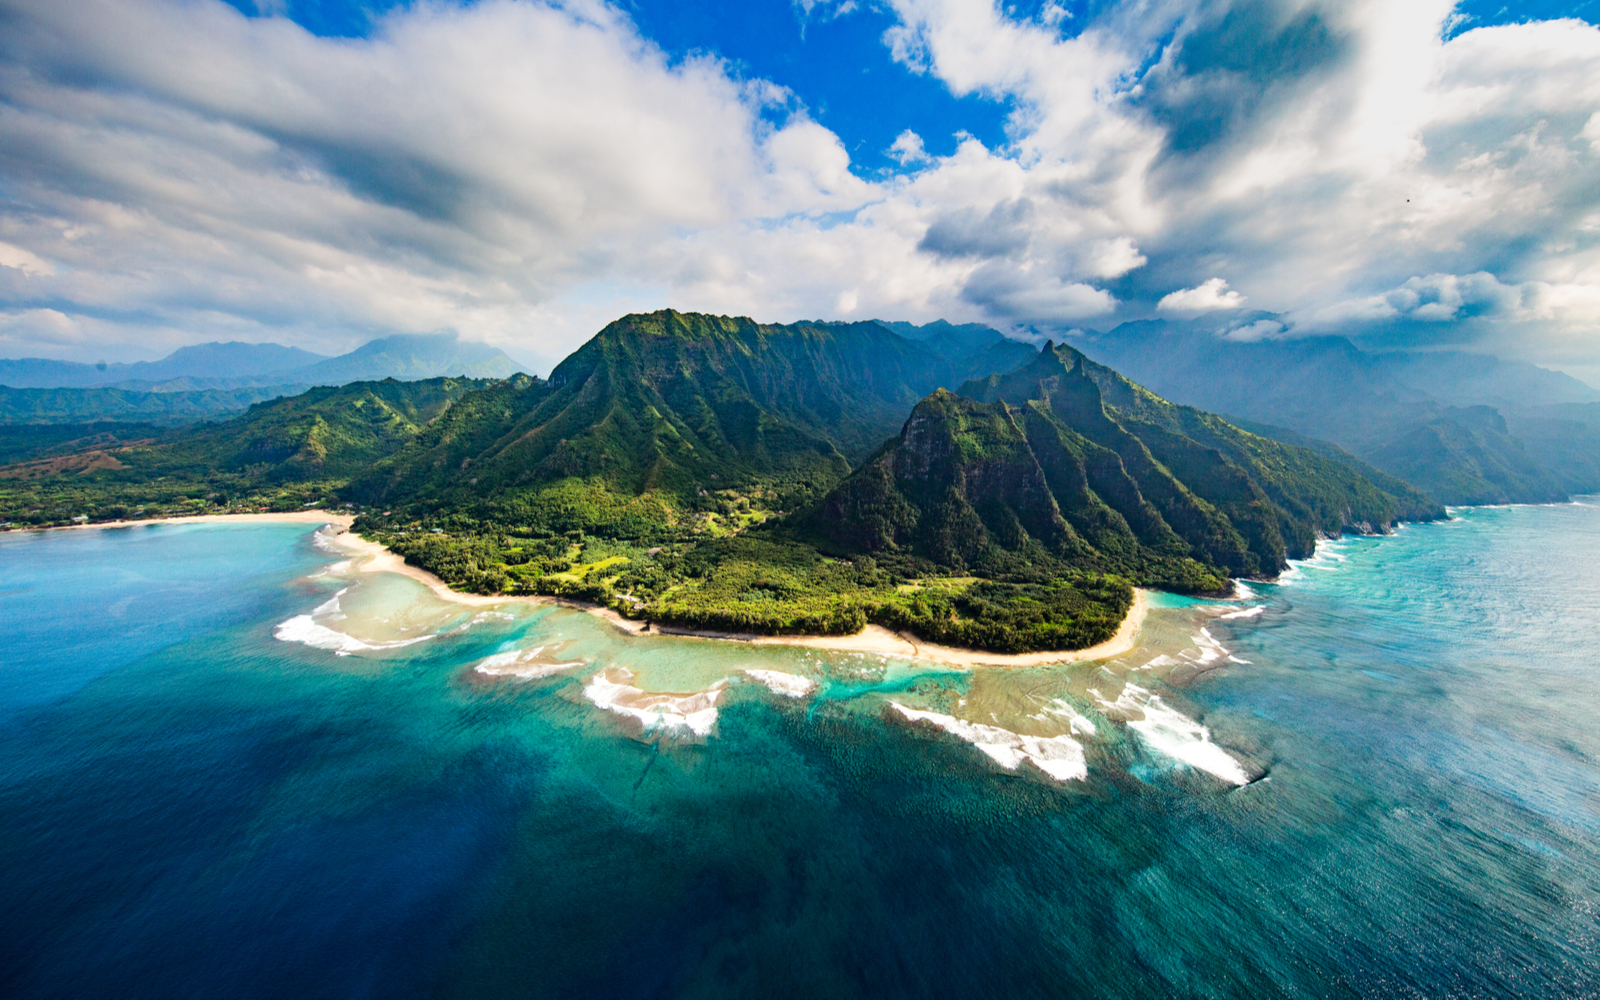 Aerial image of the Na Pali coast, home to the best resorts in Kauai, with lush green vegetation and blue water